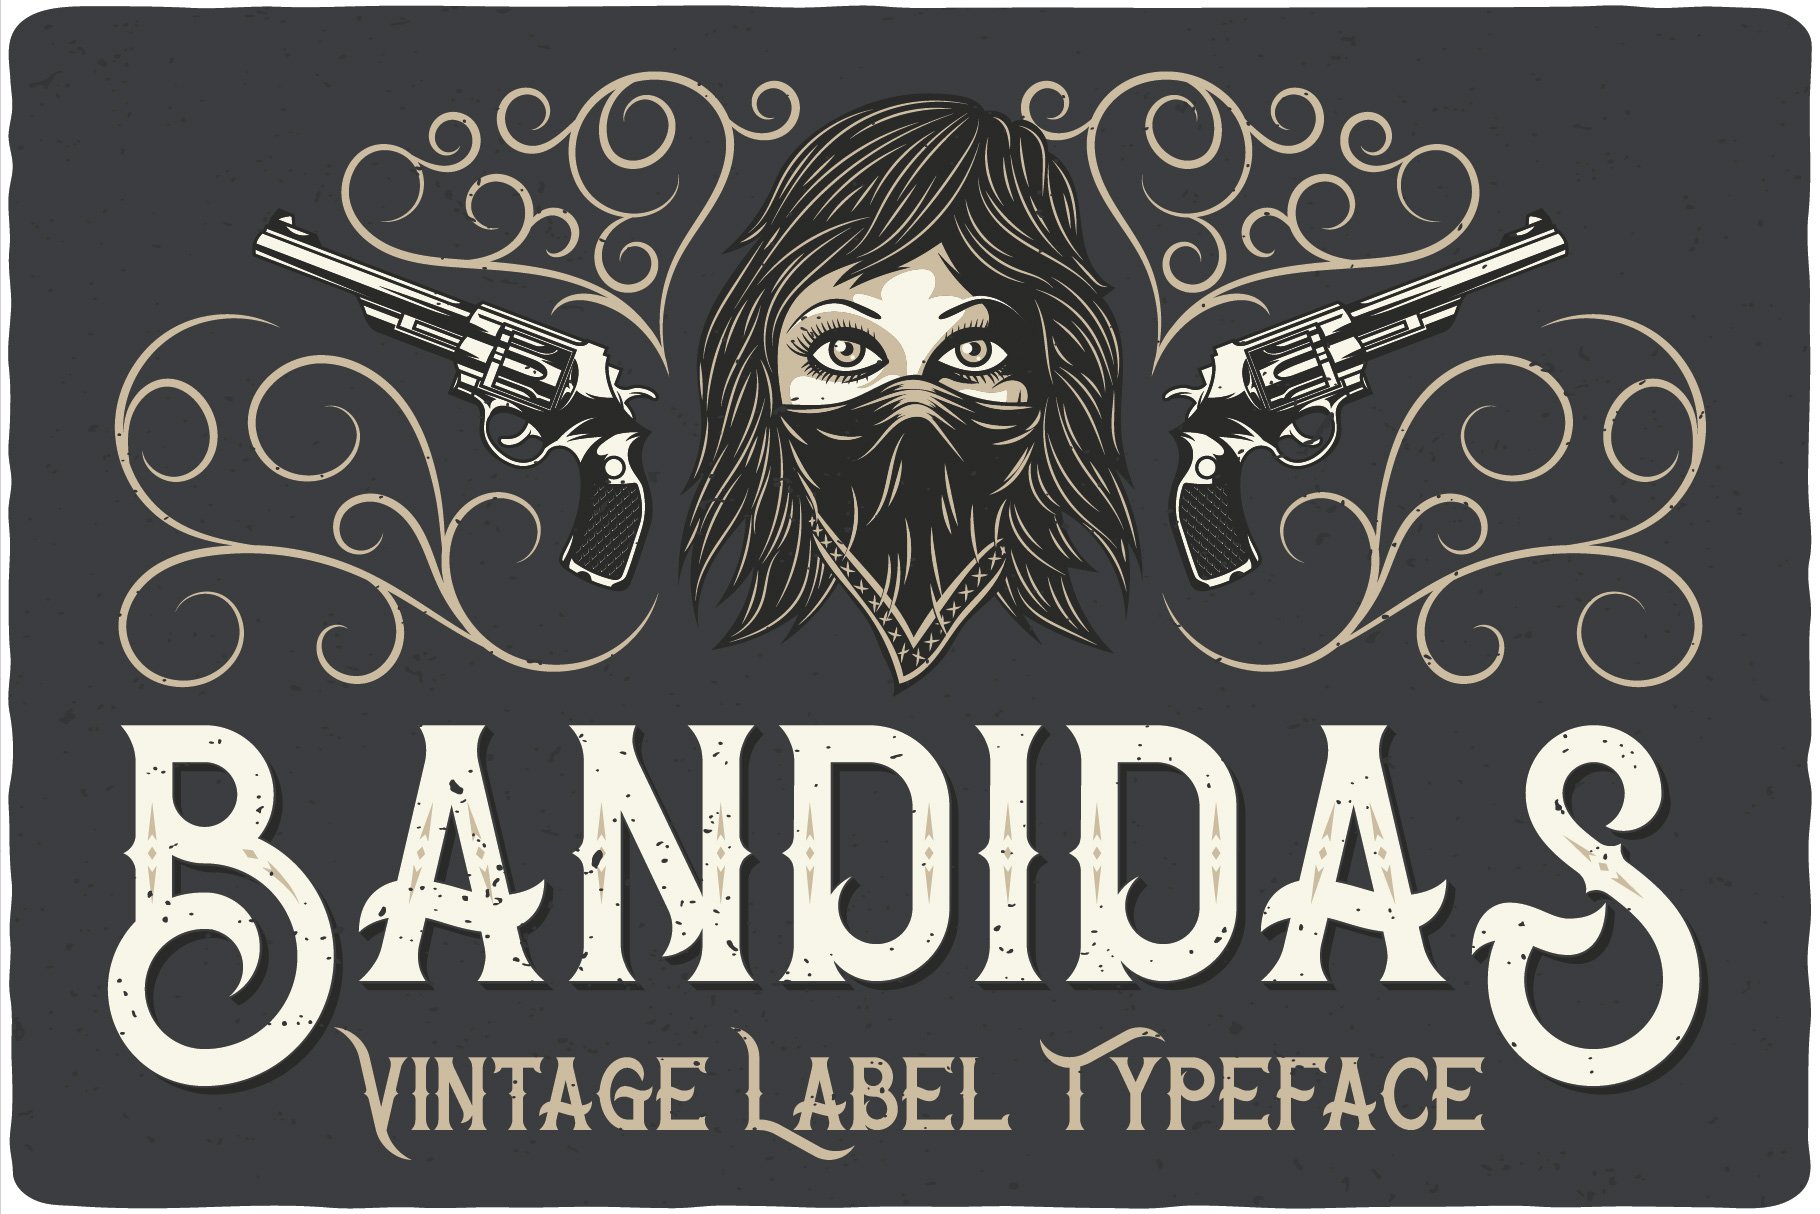 Bandidas Typeface cover image.